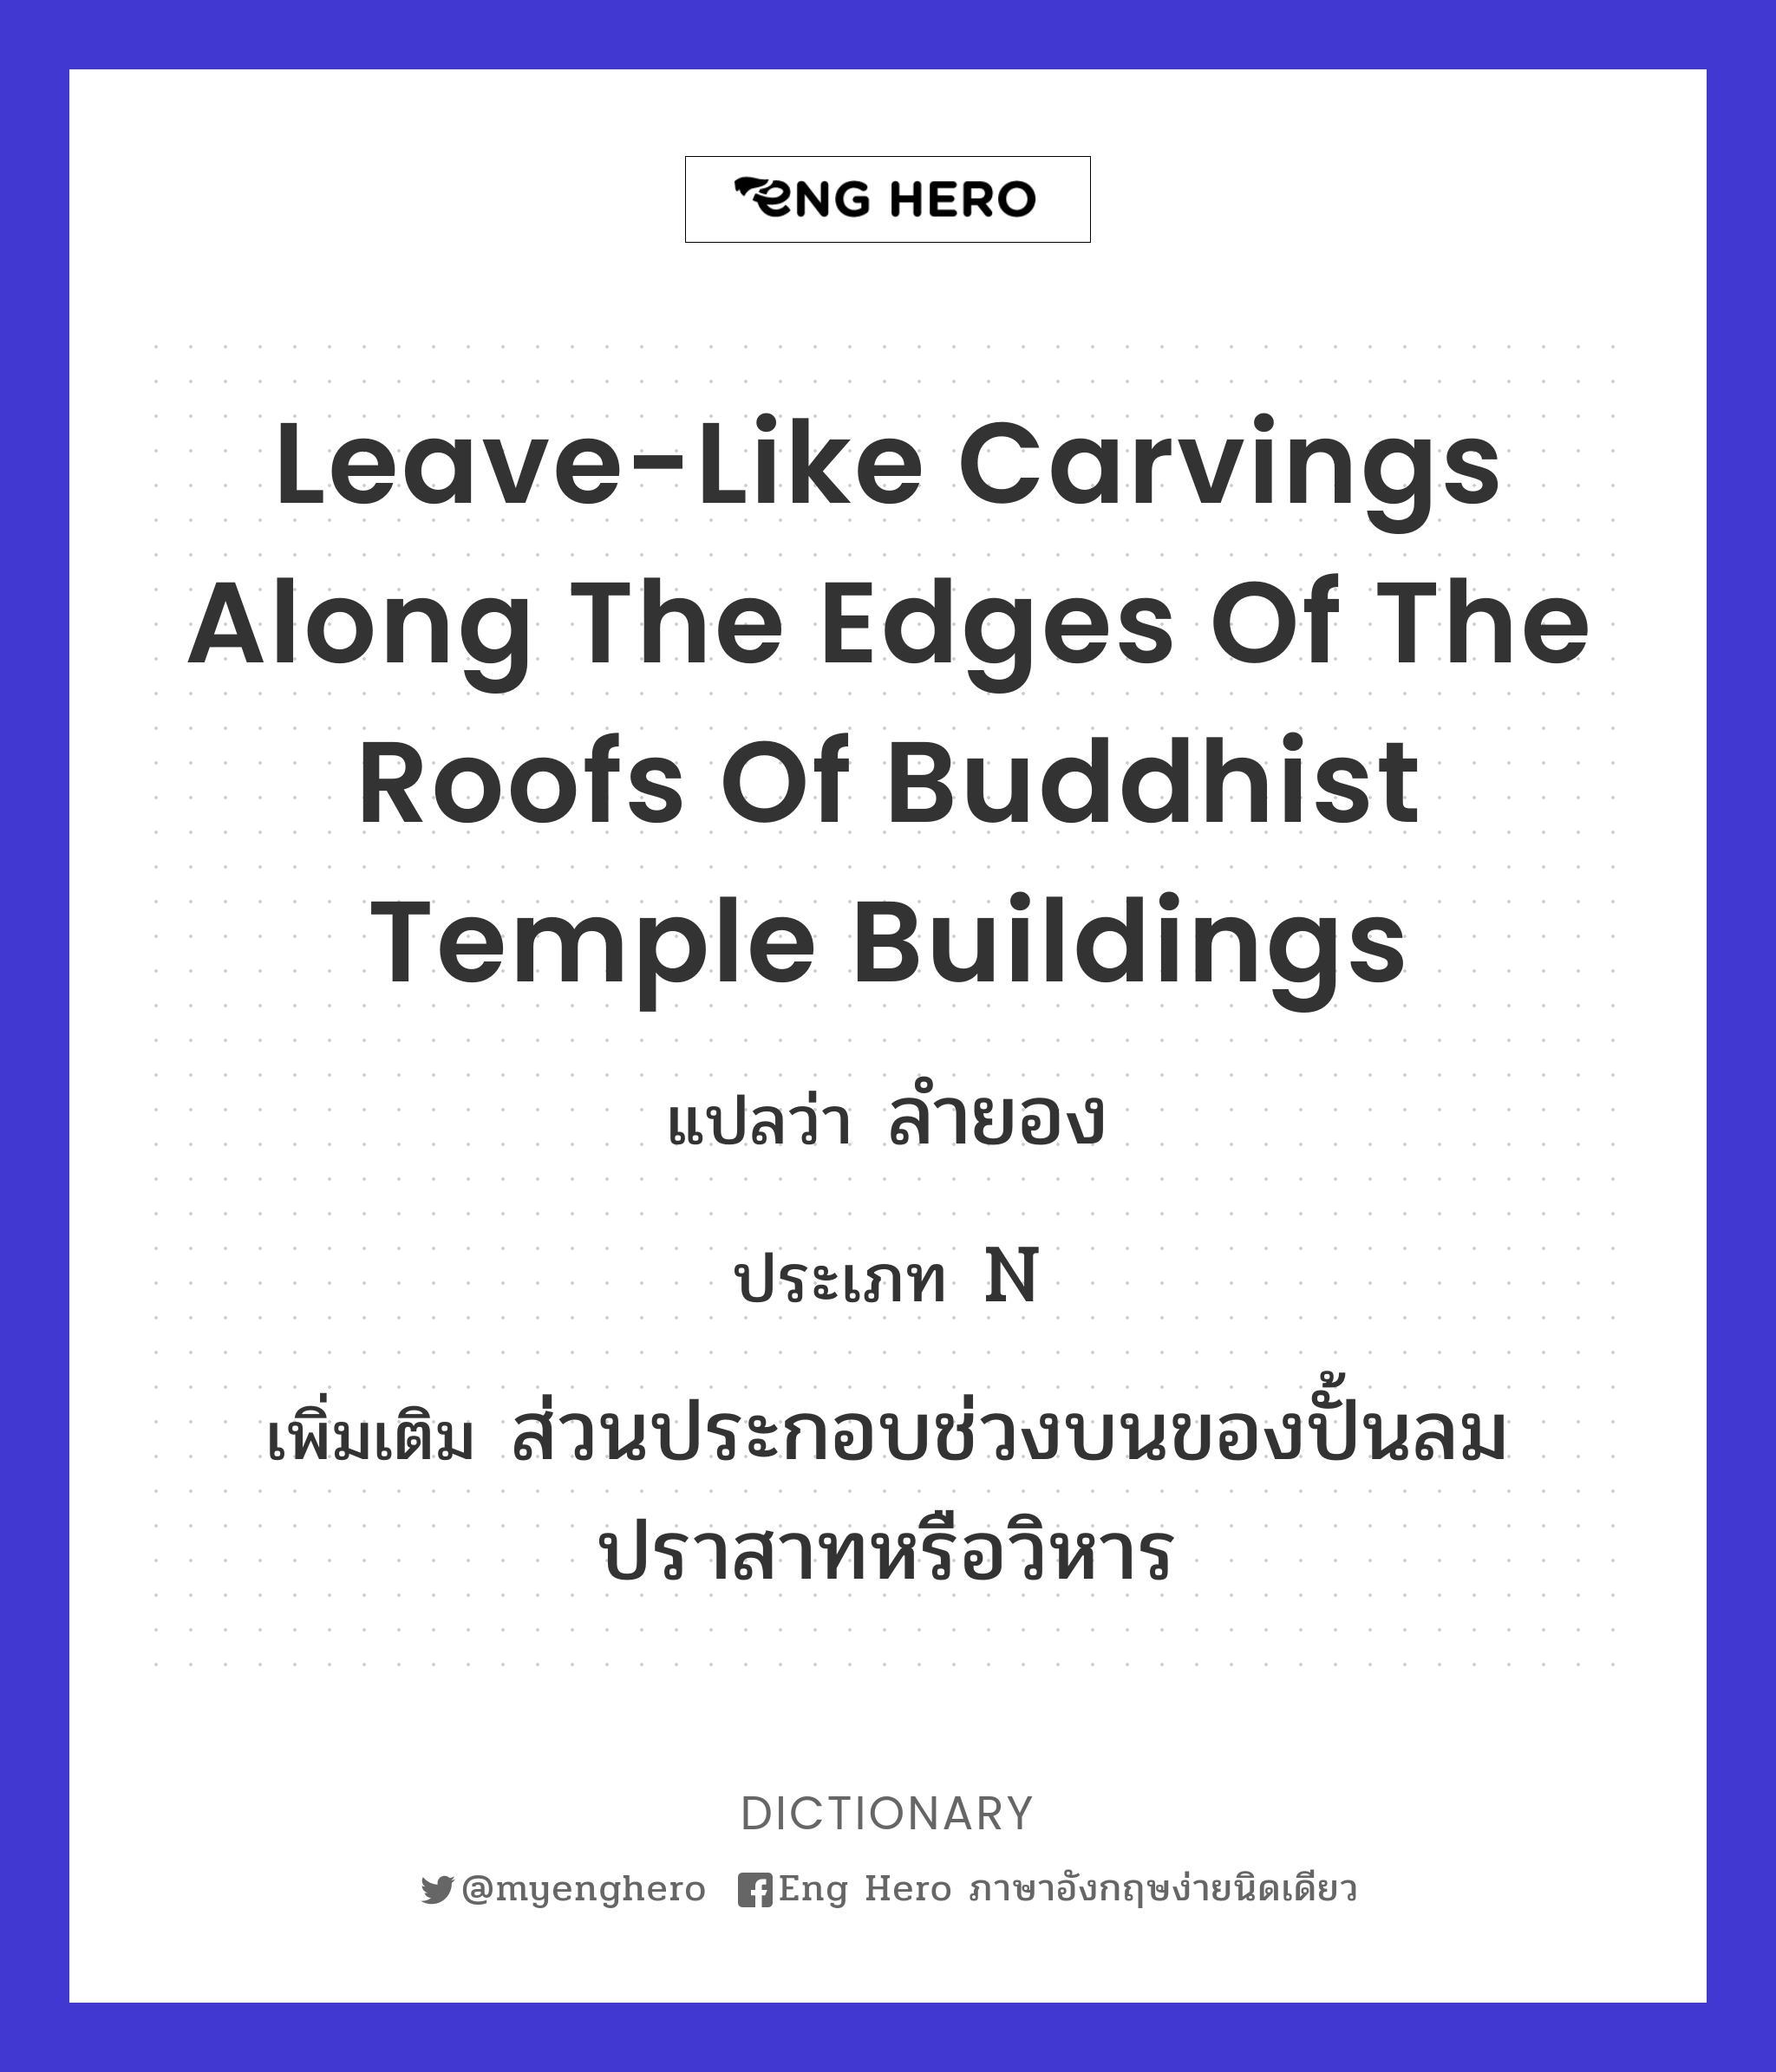 leave-like carvings along the edges of the roofs of Buddhist temple buildings